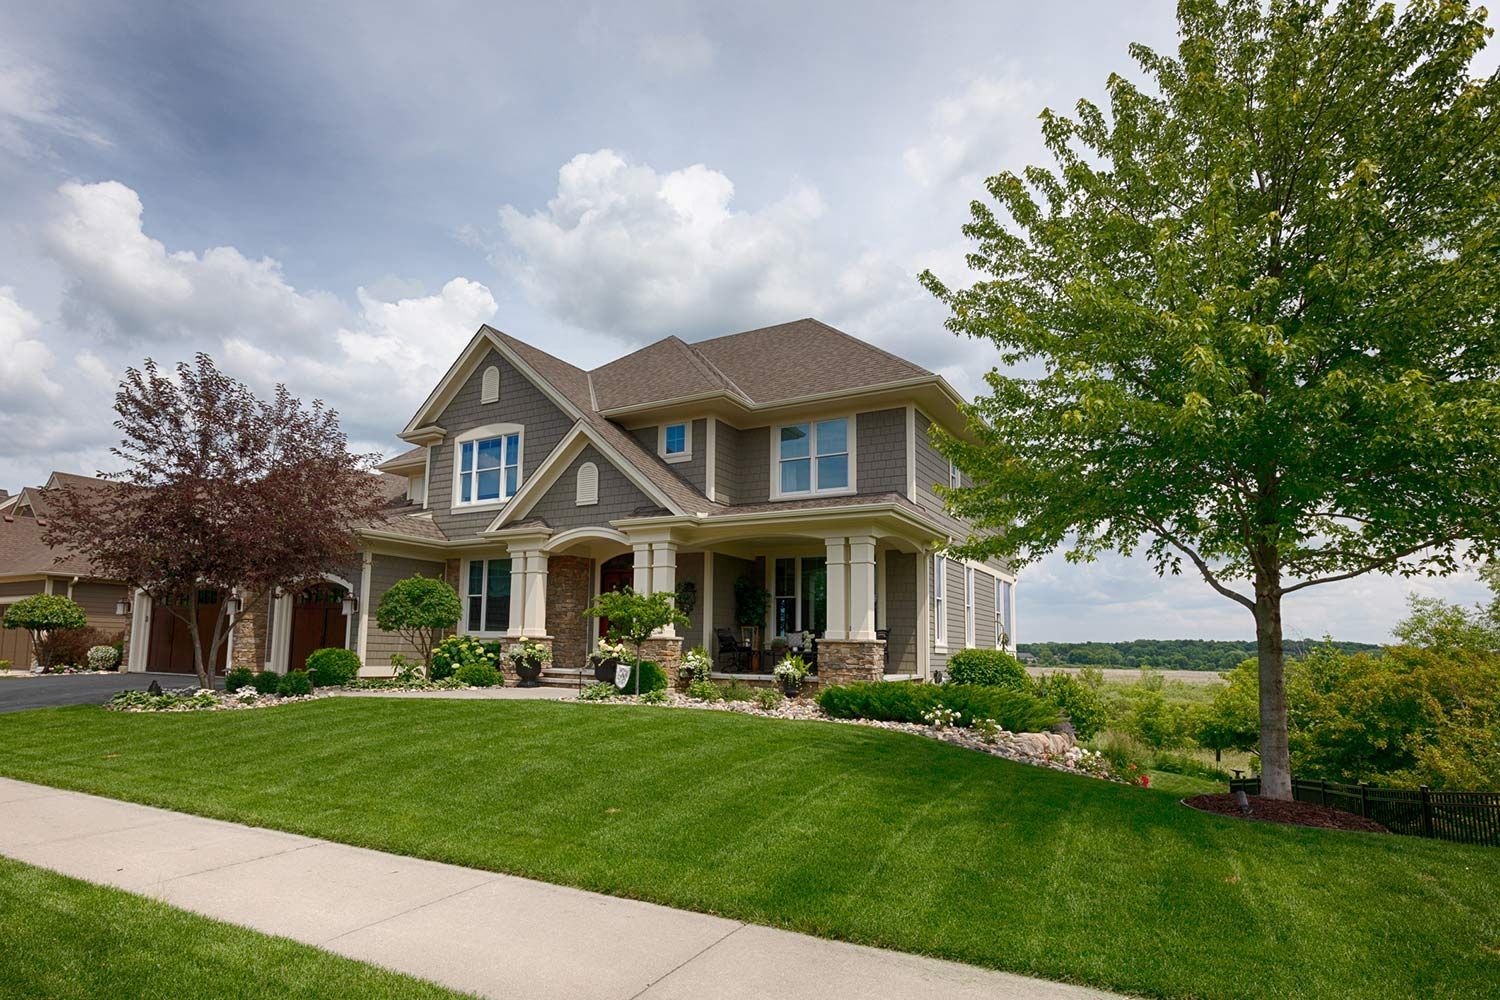 House Exterior and Garden — Aurora, IL — Great Greens Lawn Care